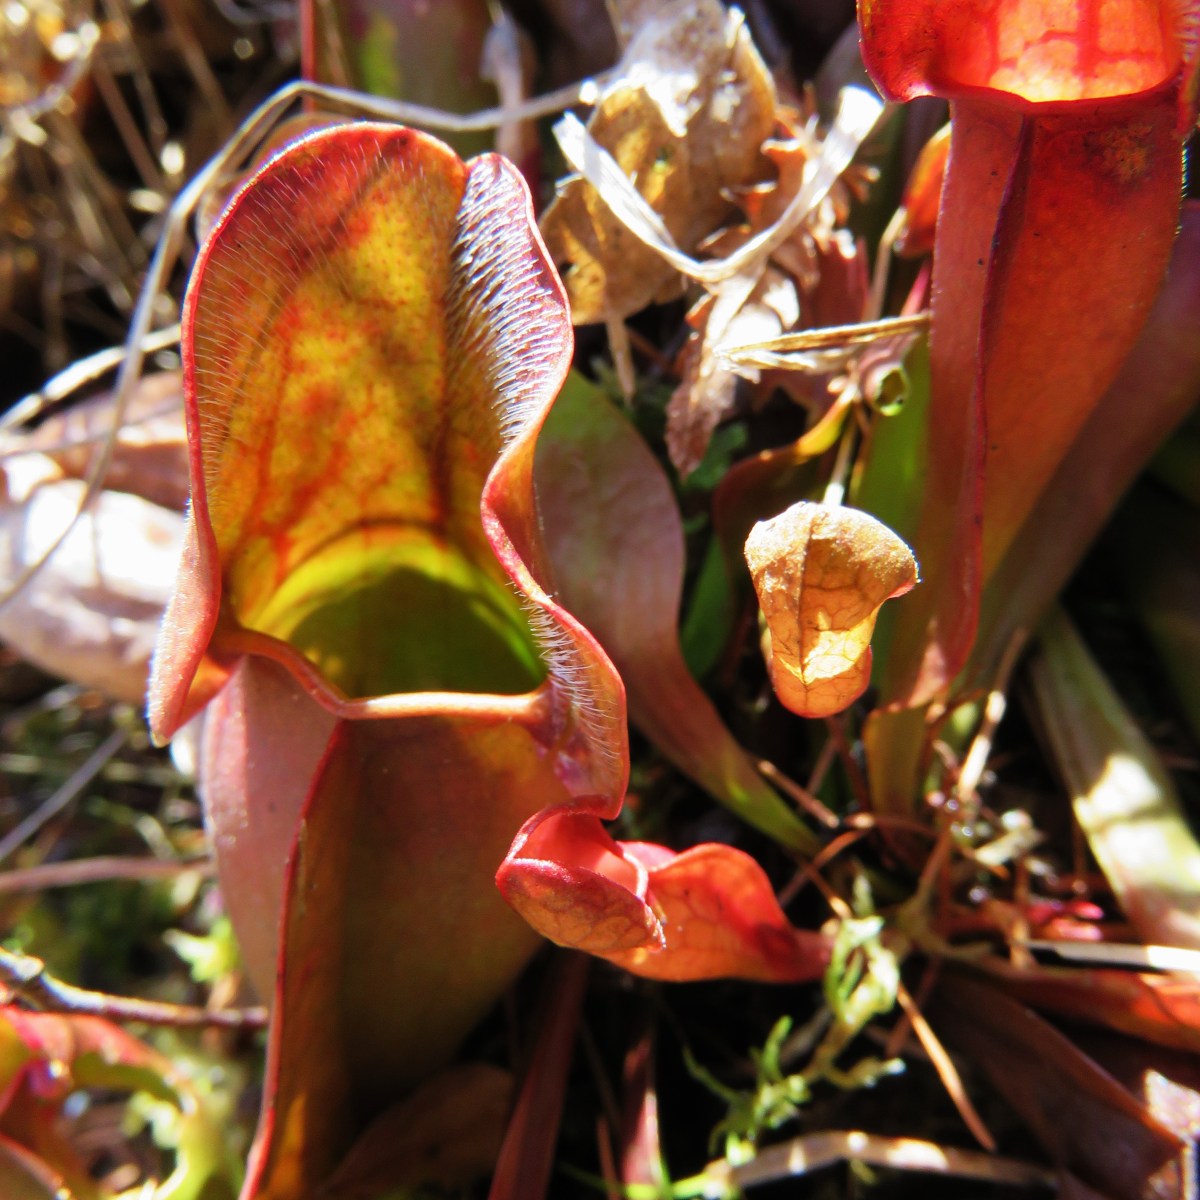 A close-up photo of pitcher plant tubes